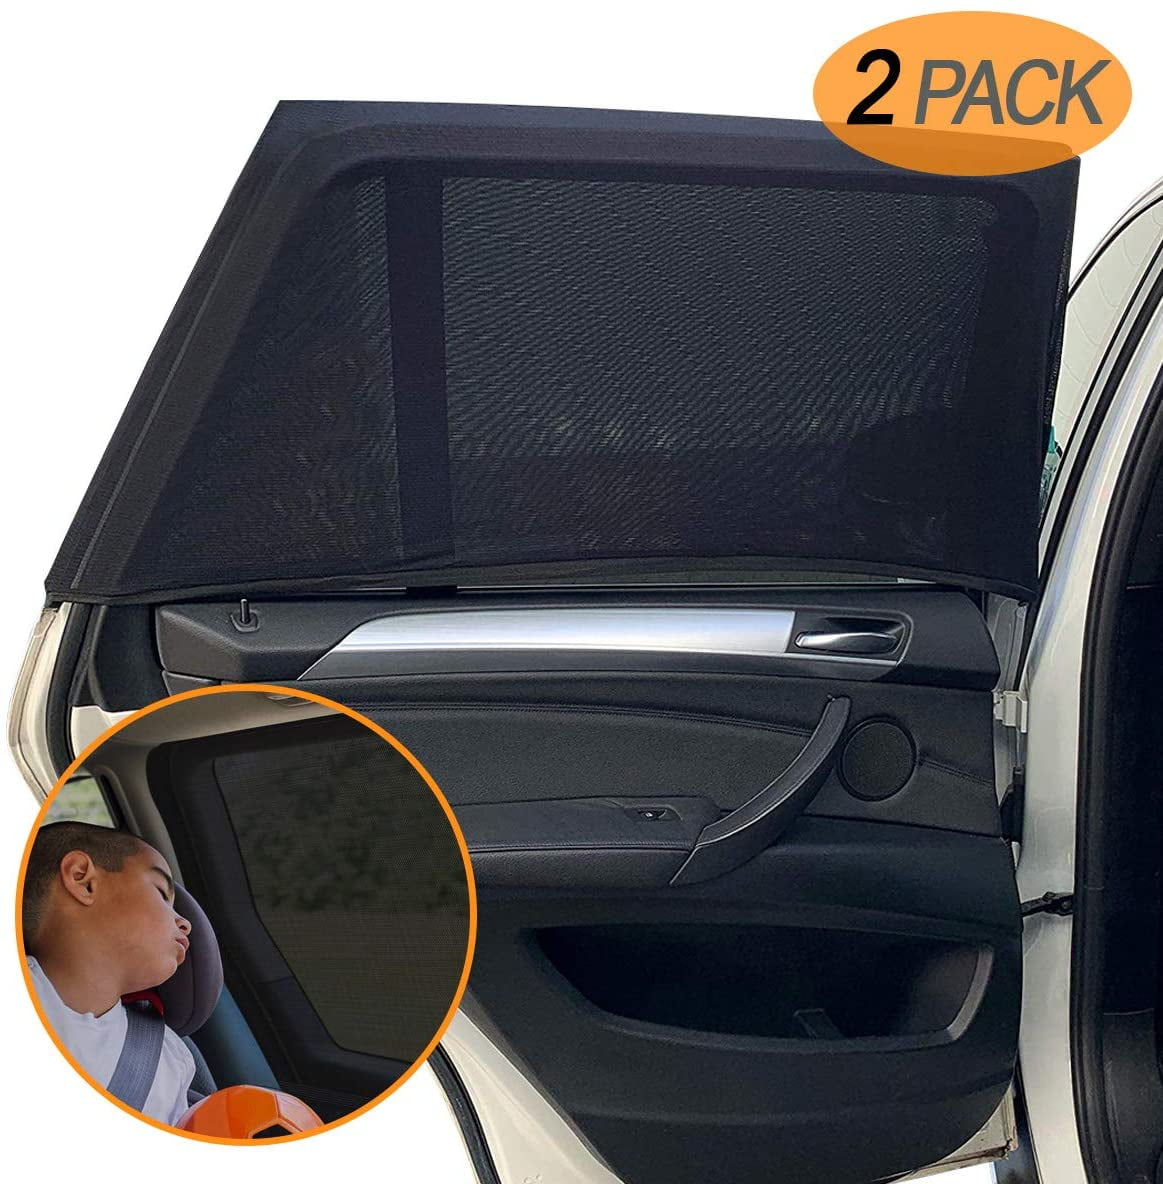 Fits Most Cars/SUVs Universal Car Window Shade,2 Pack Elasticized Breathable Mesh Car Rear Side Window Shade Sunshade Car Heat and Privacy Protection,Provide Sun Protection for Babies Kids Pets 